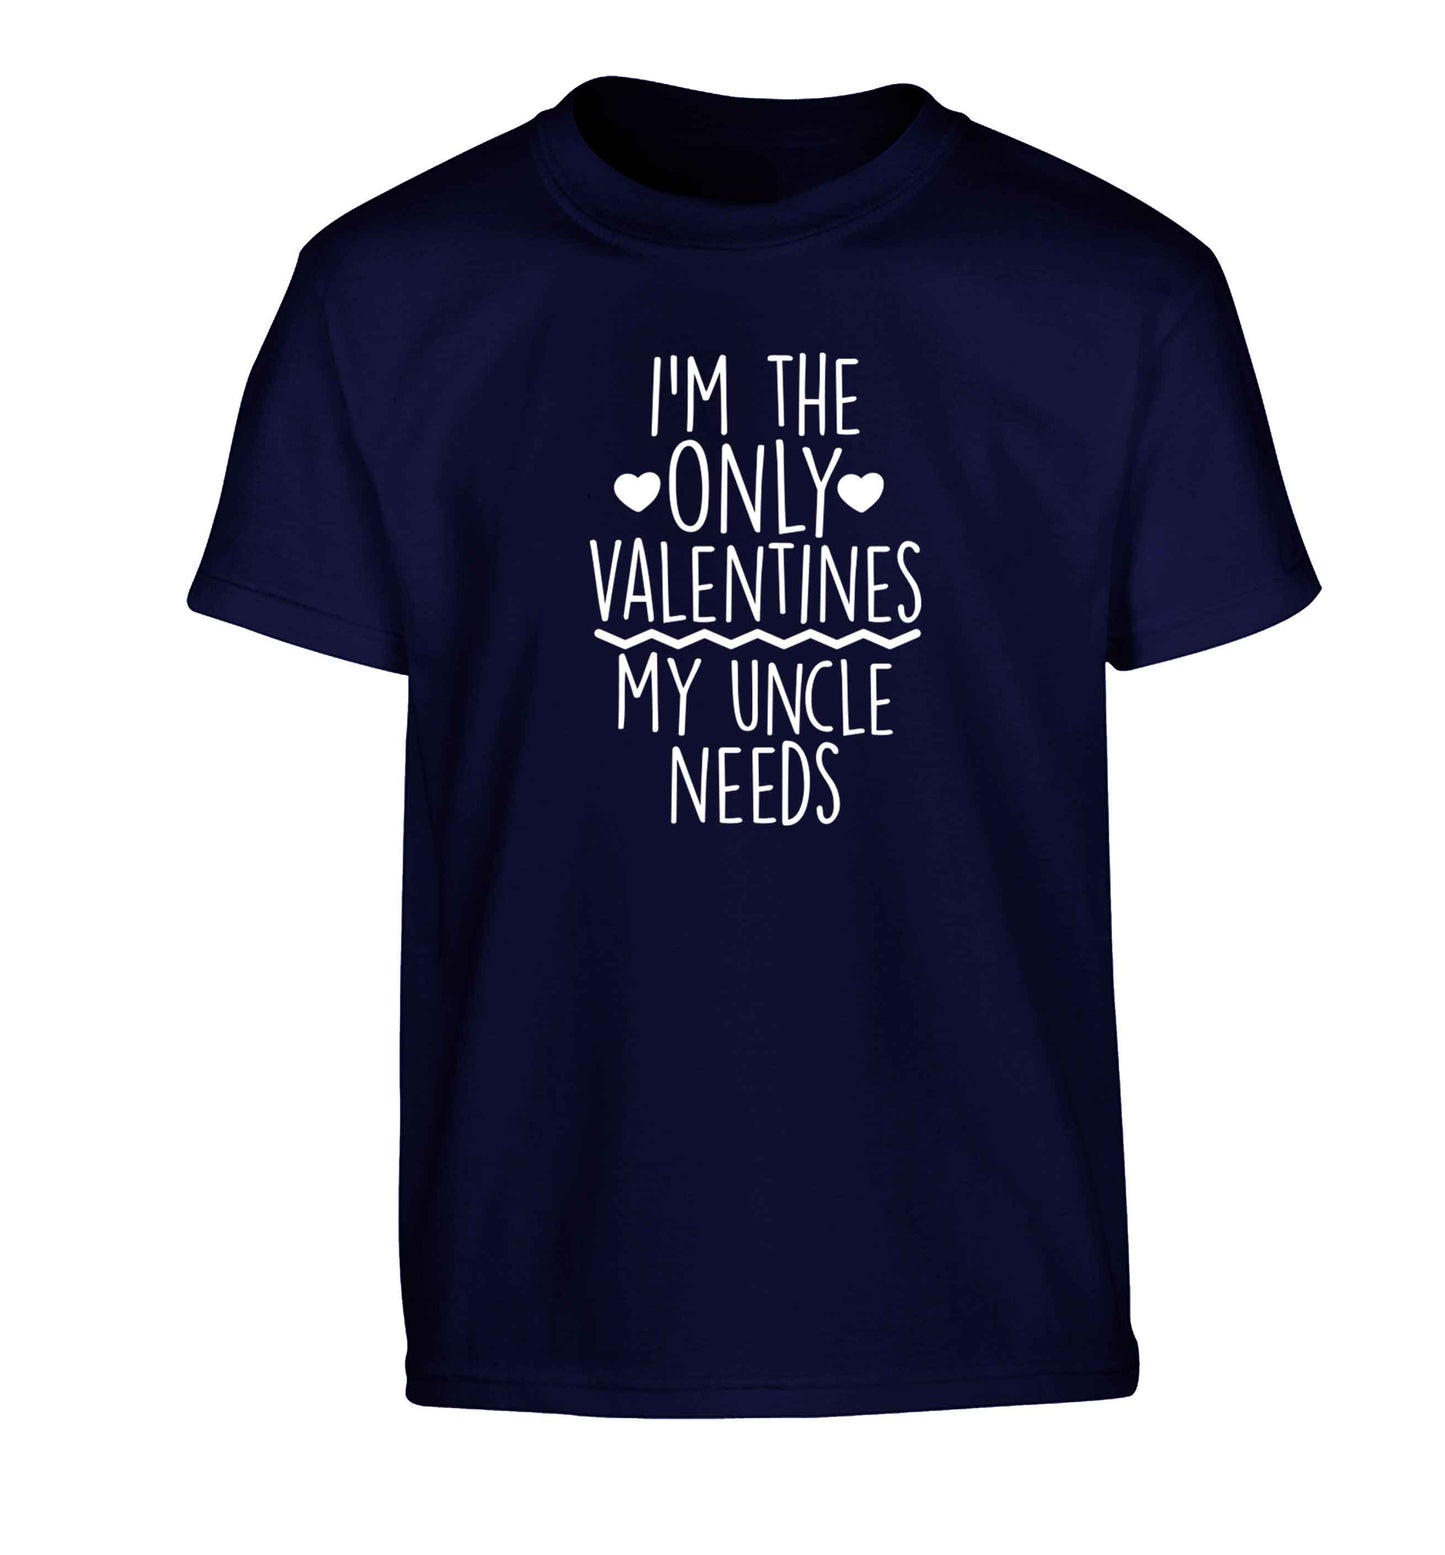 I'm the only valentines my uncle needs Children's navy Tshirt 12-13 Years